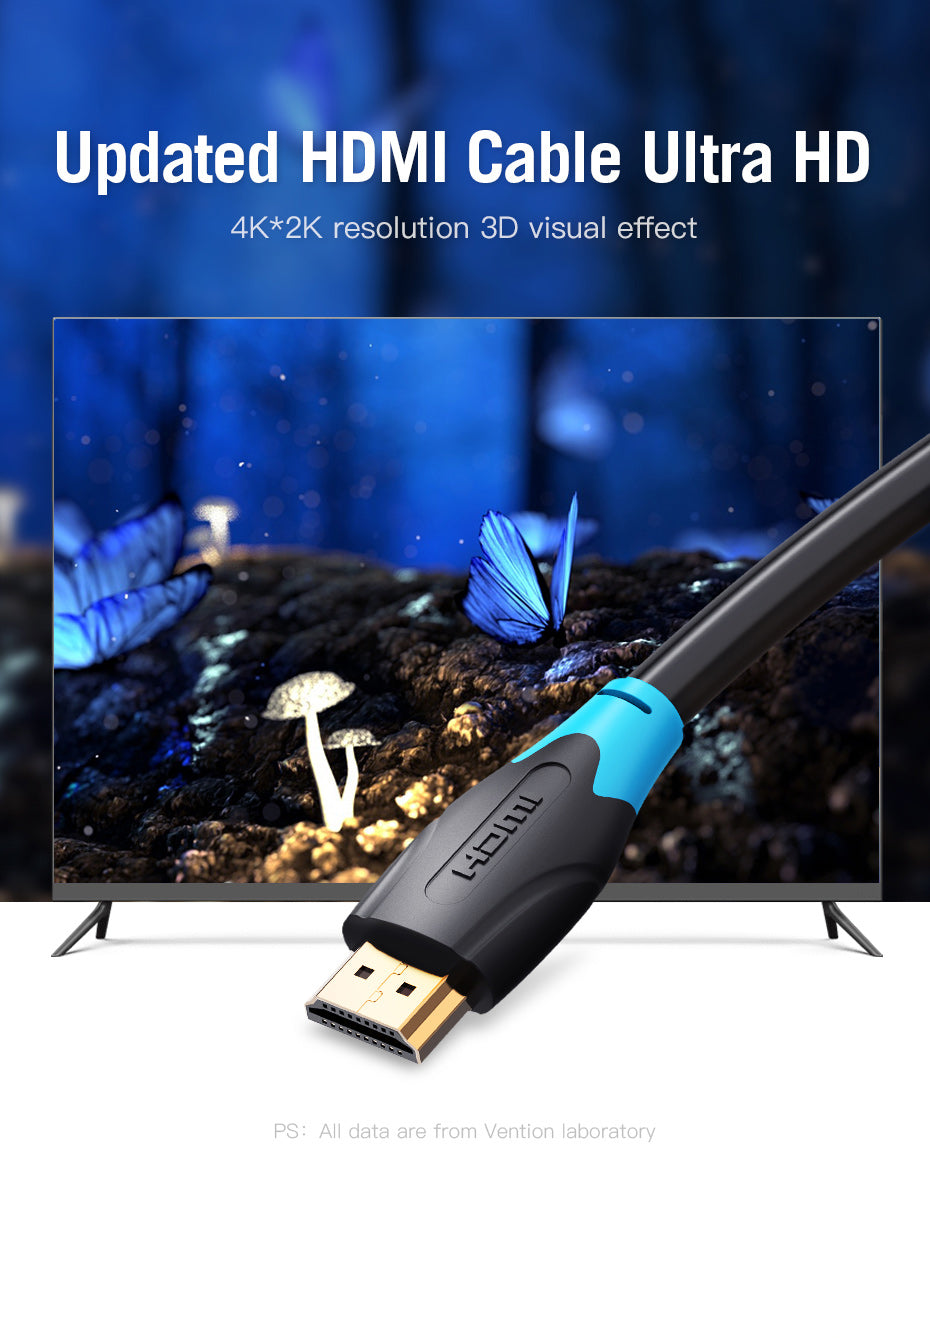 AACBJ VENTION - Cable  HDMI 1.4; HDMI enchufe,ambos lados; PVC